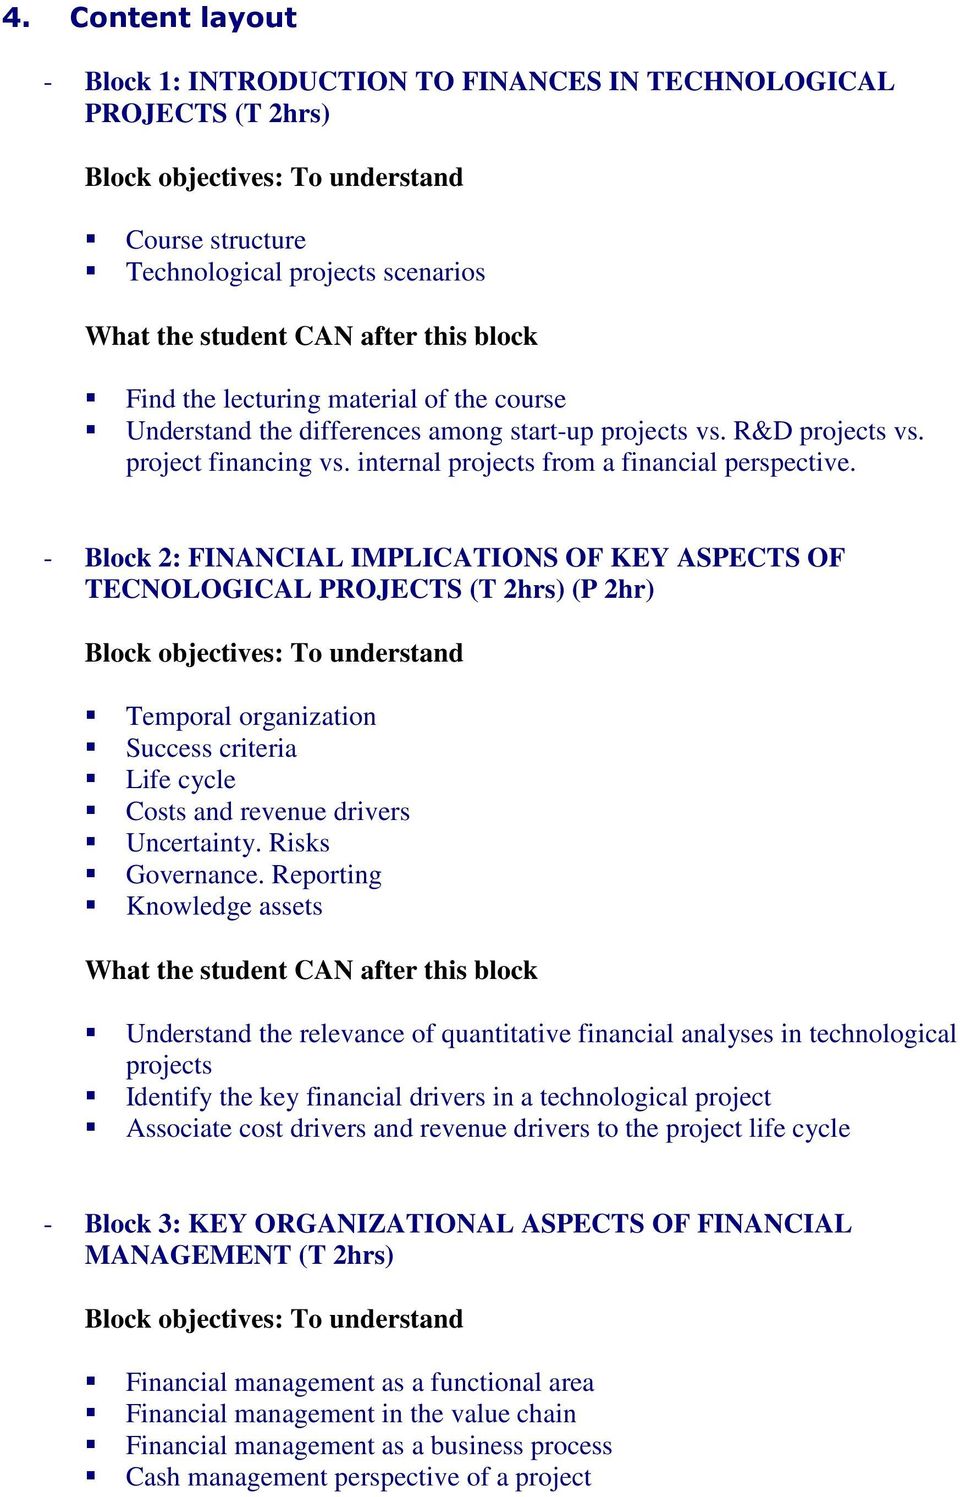 - Block 2: FINANCIAL IMPLICATIONS OF KEY ASPECTS OF TECNOLOGICAL PROJECTS (T 2hrs) (P 2hr) Temporal organization Success criteria Life cycle Costs and revenue drivers Uncertainty. Risks Governance.